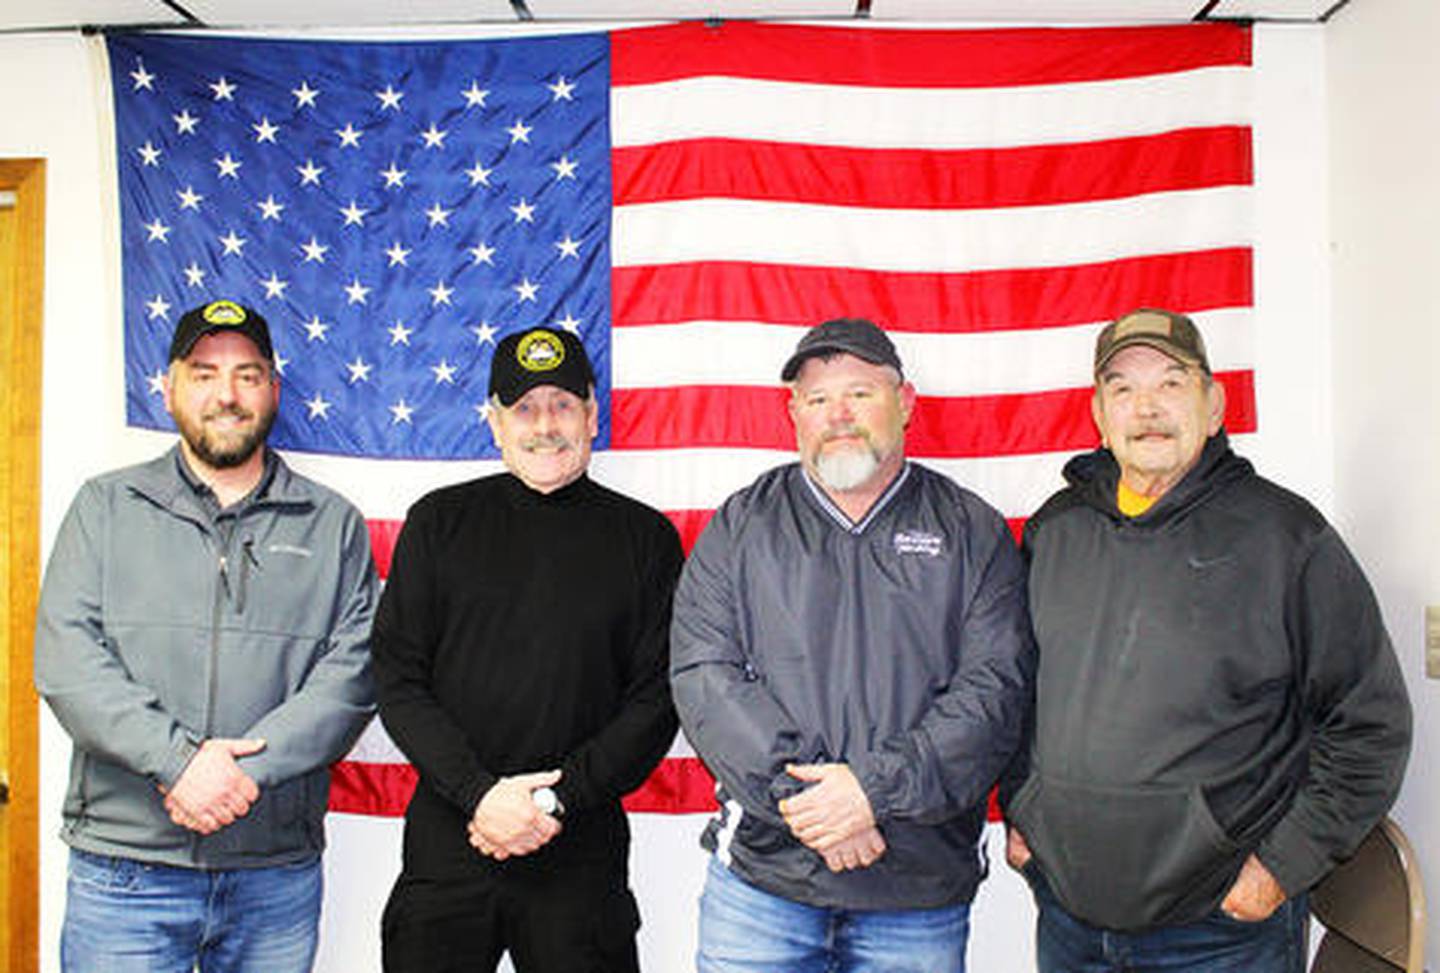 Veterans Memorial Park commissioners Roger Willey (from left), Keane Hudson, Mike Mills and Al Wikoff are bringing a military museum to Dixon slowly but surely: The museum is seeking donations for building repair, artifact upkeep and other fixes to get it open as soon as possible.